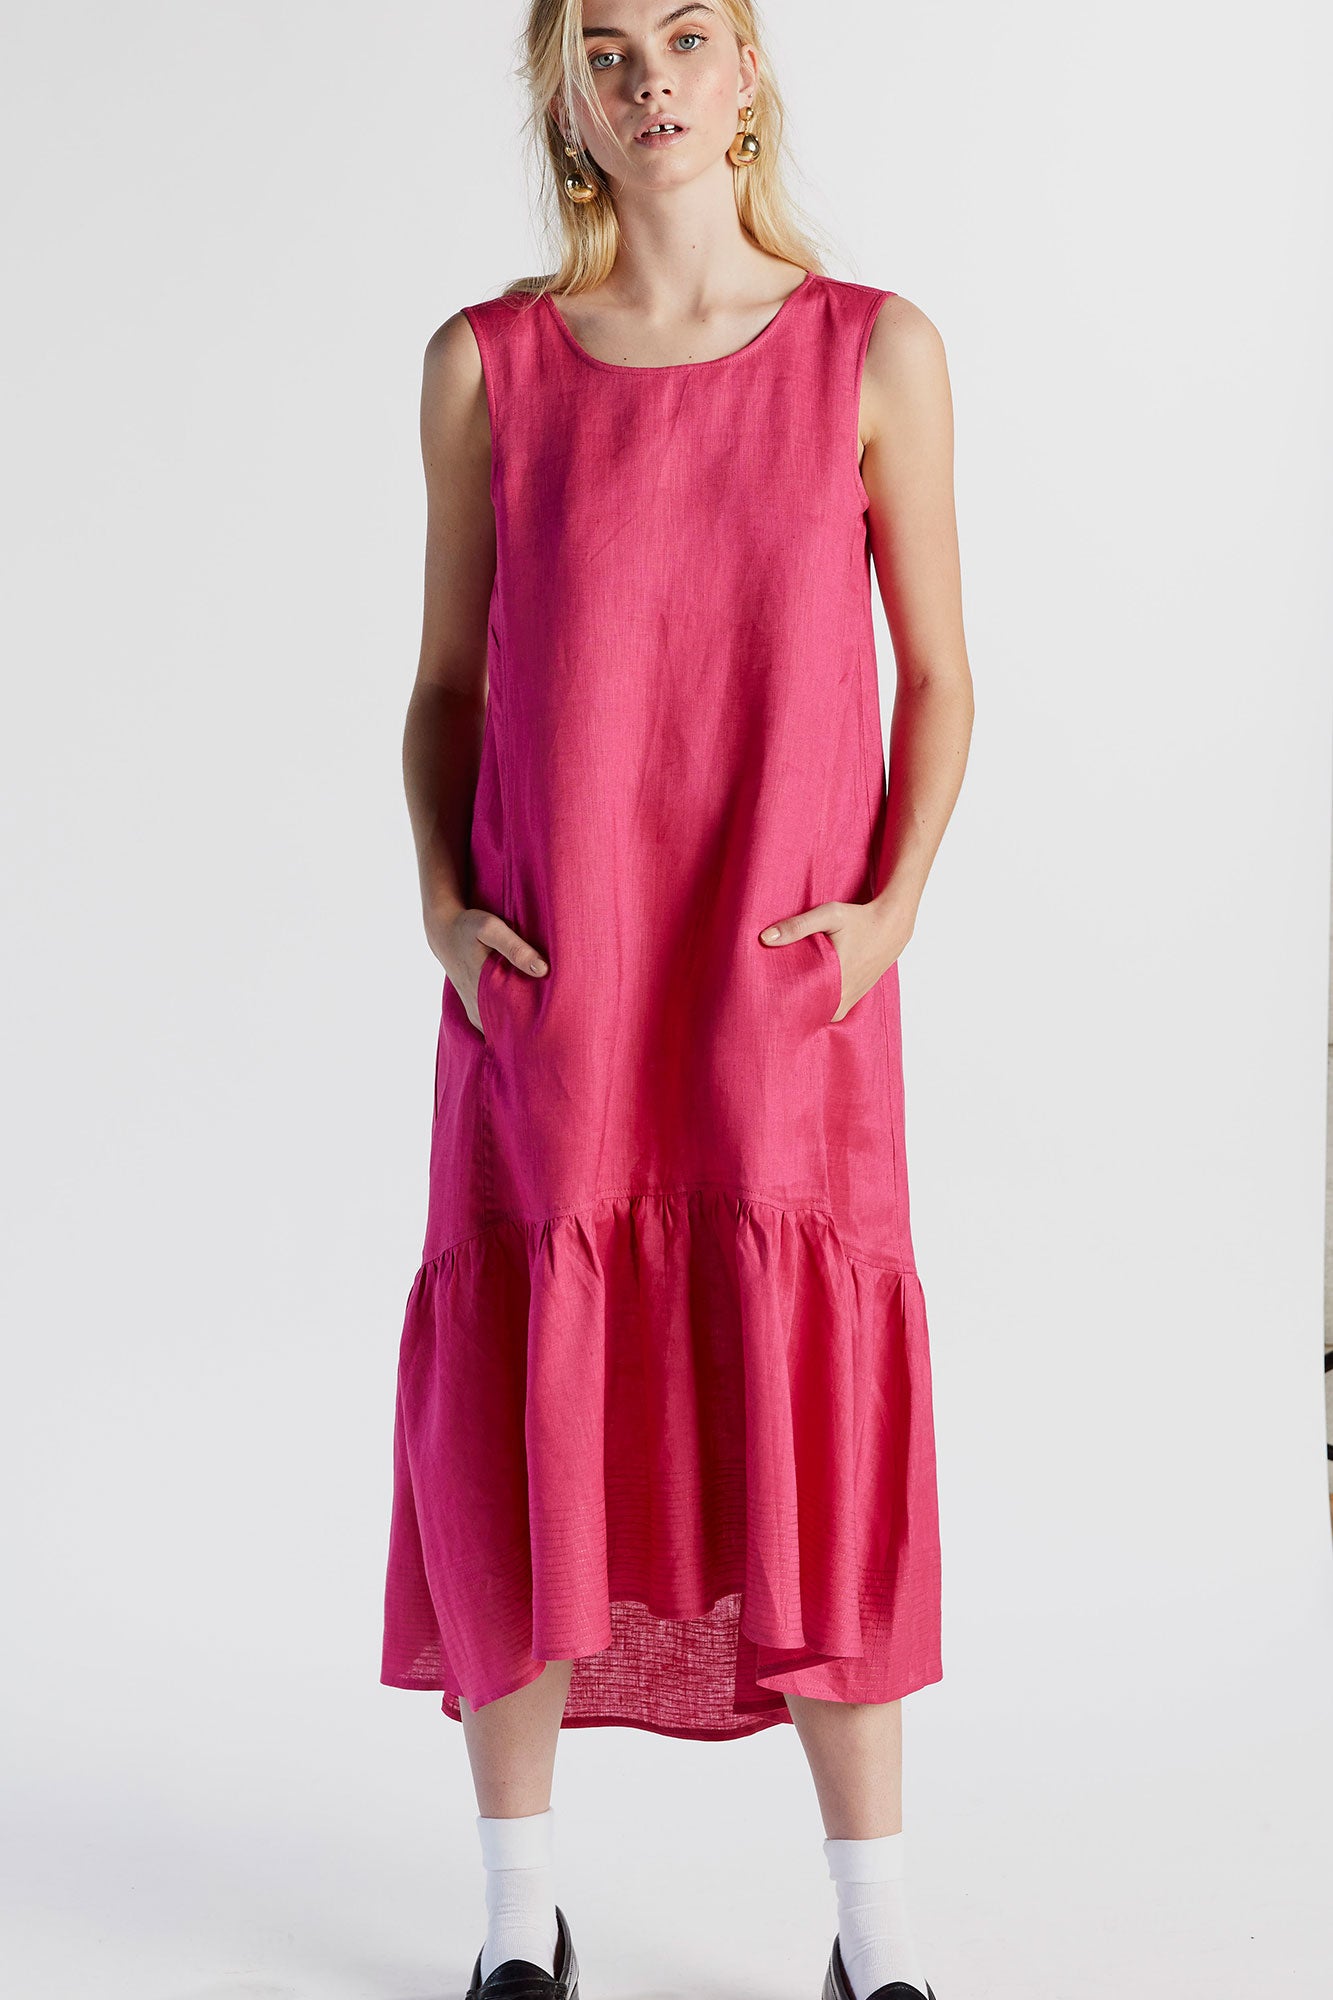 milly hot pink dress